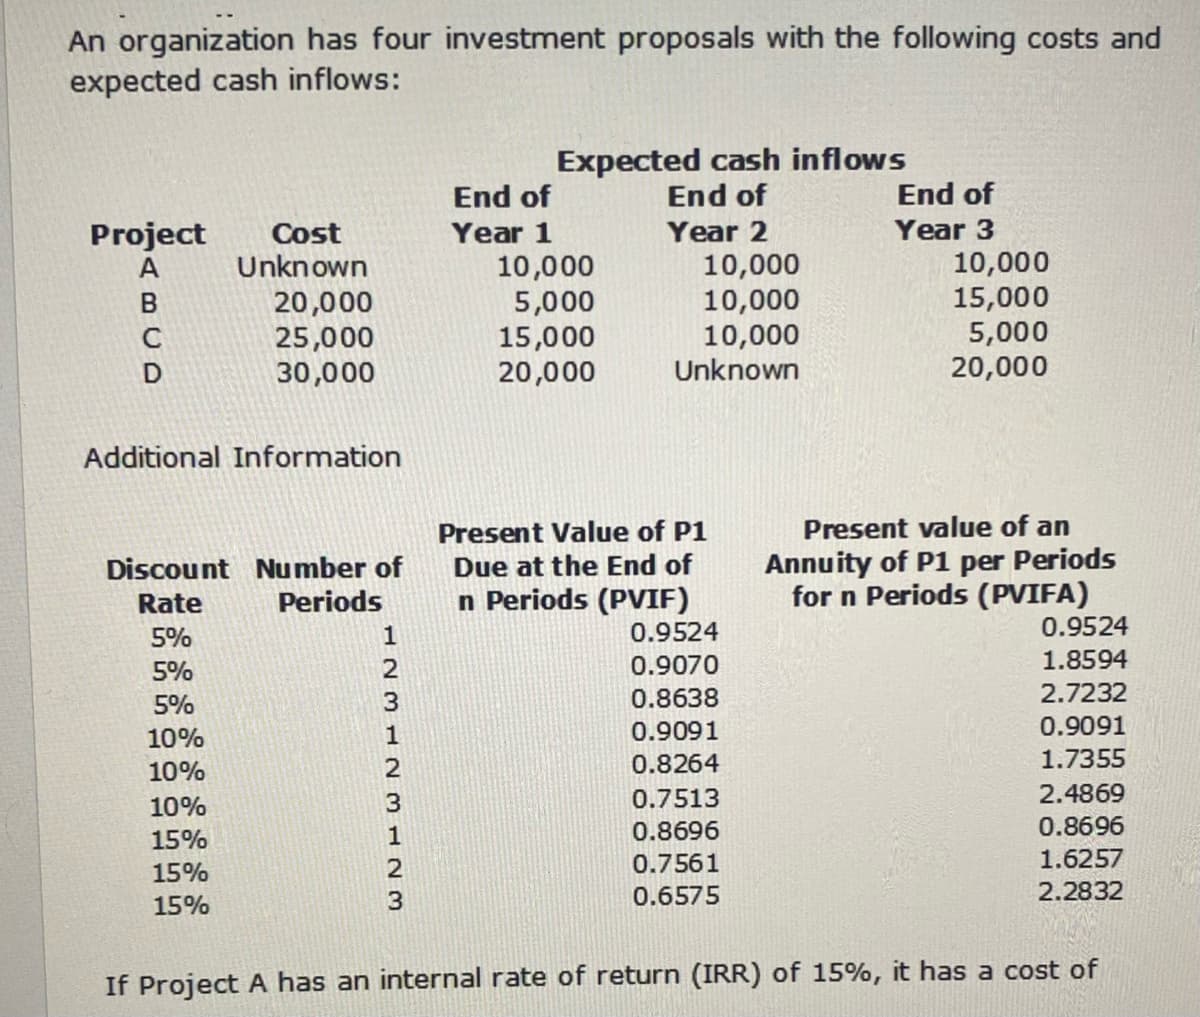 An organization has four investment proposals with the following costs and
expected cash inflows:
Expected cash inflows
End of
End of
End of
Year 2
Year 3
Project
A
Cost
Year 1
10,000
10,000
10,000
Unknown
10,000
15,000
5,000
20,000
Unknown
20,000
25,000
30,000
10,000
5,000
15,000
20,000
Additional Information
Present Value of P1
Present value of an
Discount Number of
Periods
Annuity of P1 per Periods
for n Periods (PVIFA)
0.9524
Due at the End of
Rate
n Periods (PVIF)
5%
0.9524
5%
0.9070
1.8594
5%
3
0.8638
2.7232
10%
0.9091
0.9091
10%
2
0.8264
1.7355
3
0.7513
2.4869
10%
0.8696
0.8696
15%
0.7561
1.6257
15%
0.6575
2.2832
15%
If Project A has an internal rate of return (IRR) of 15%, it has a cost of
IBCD
